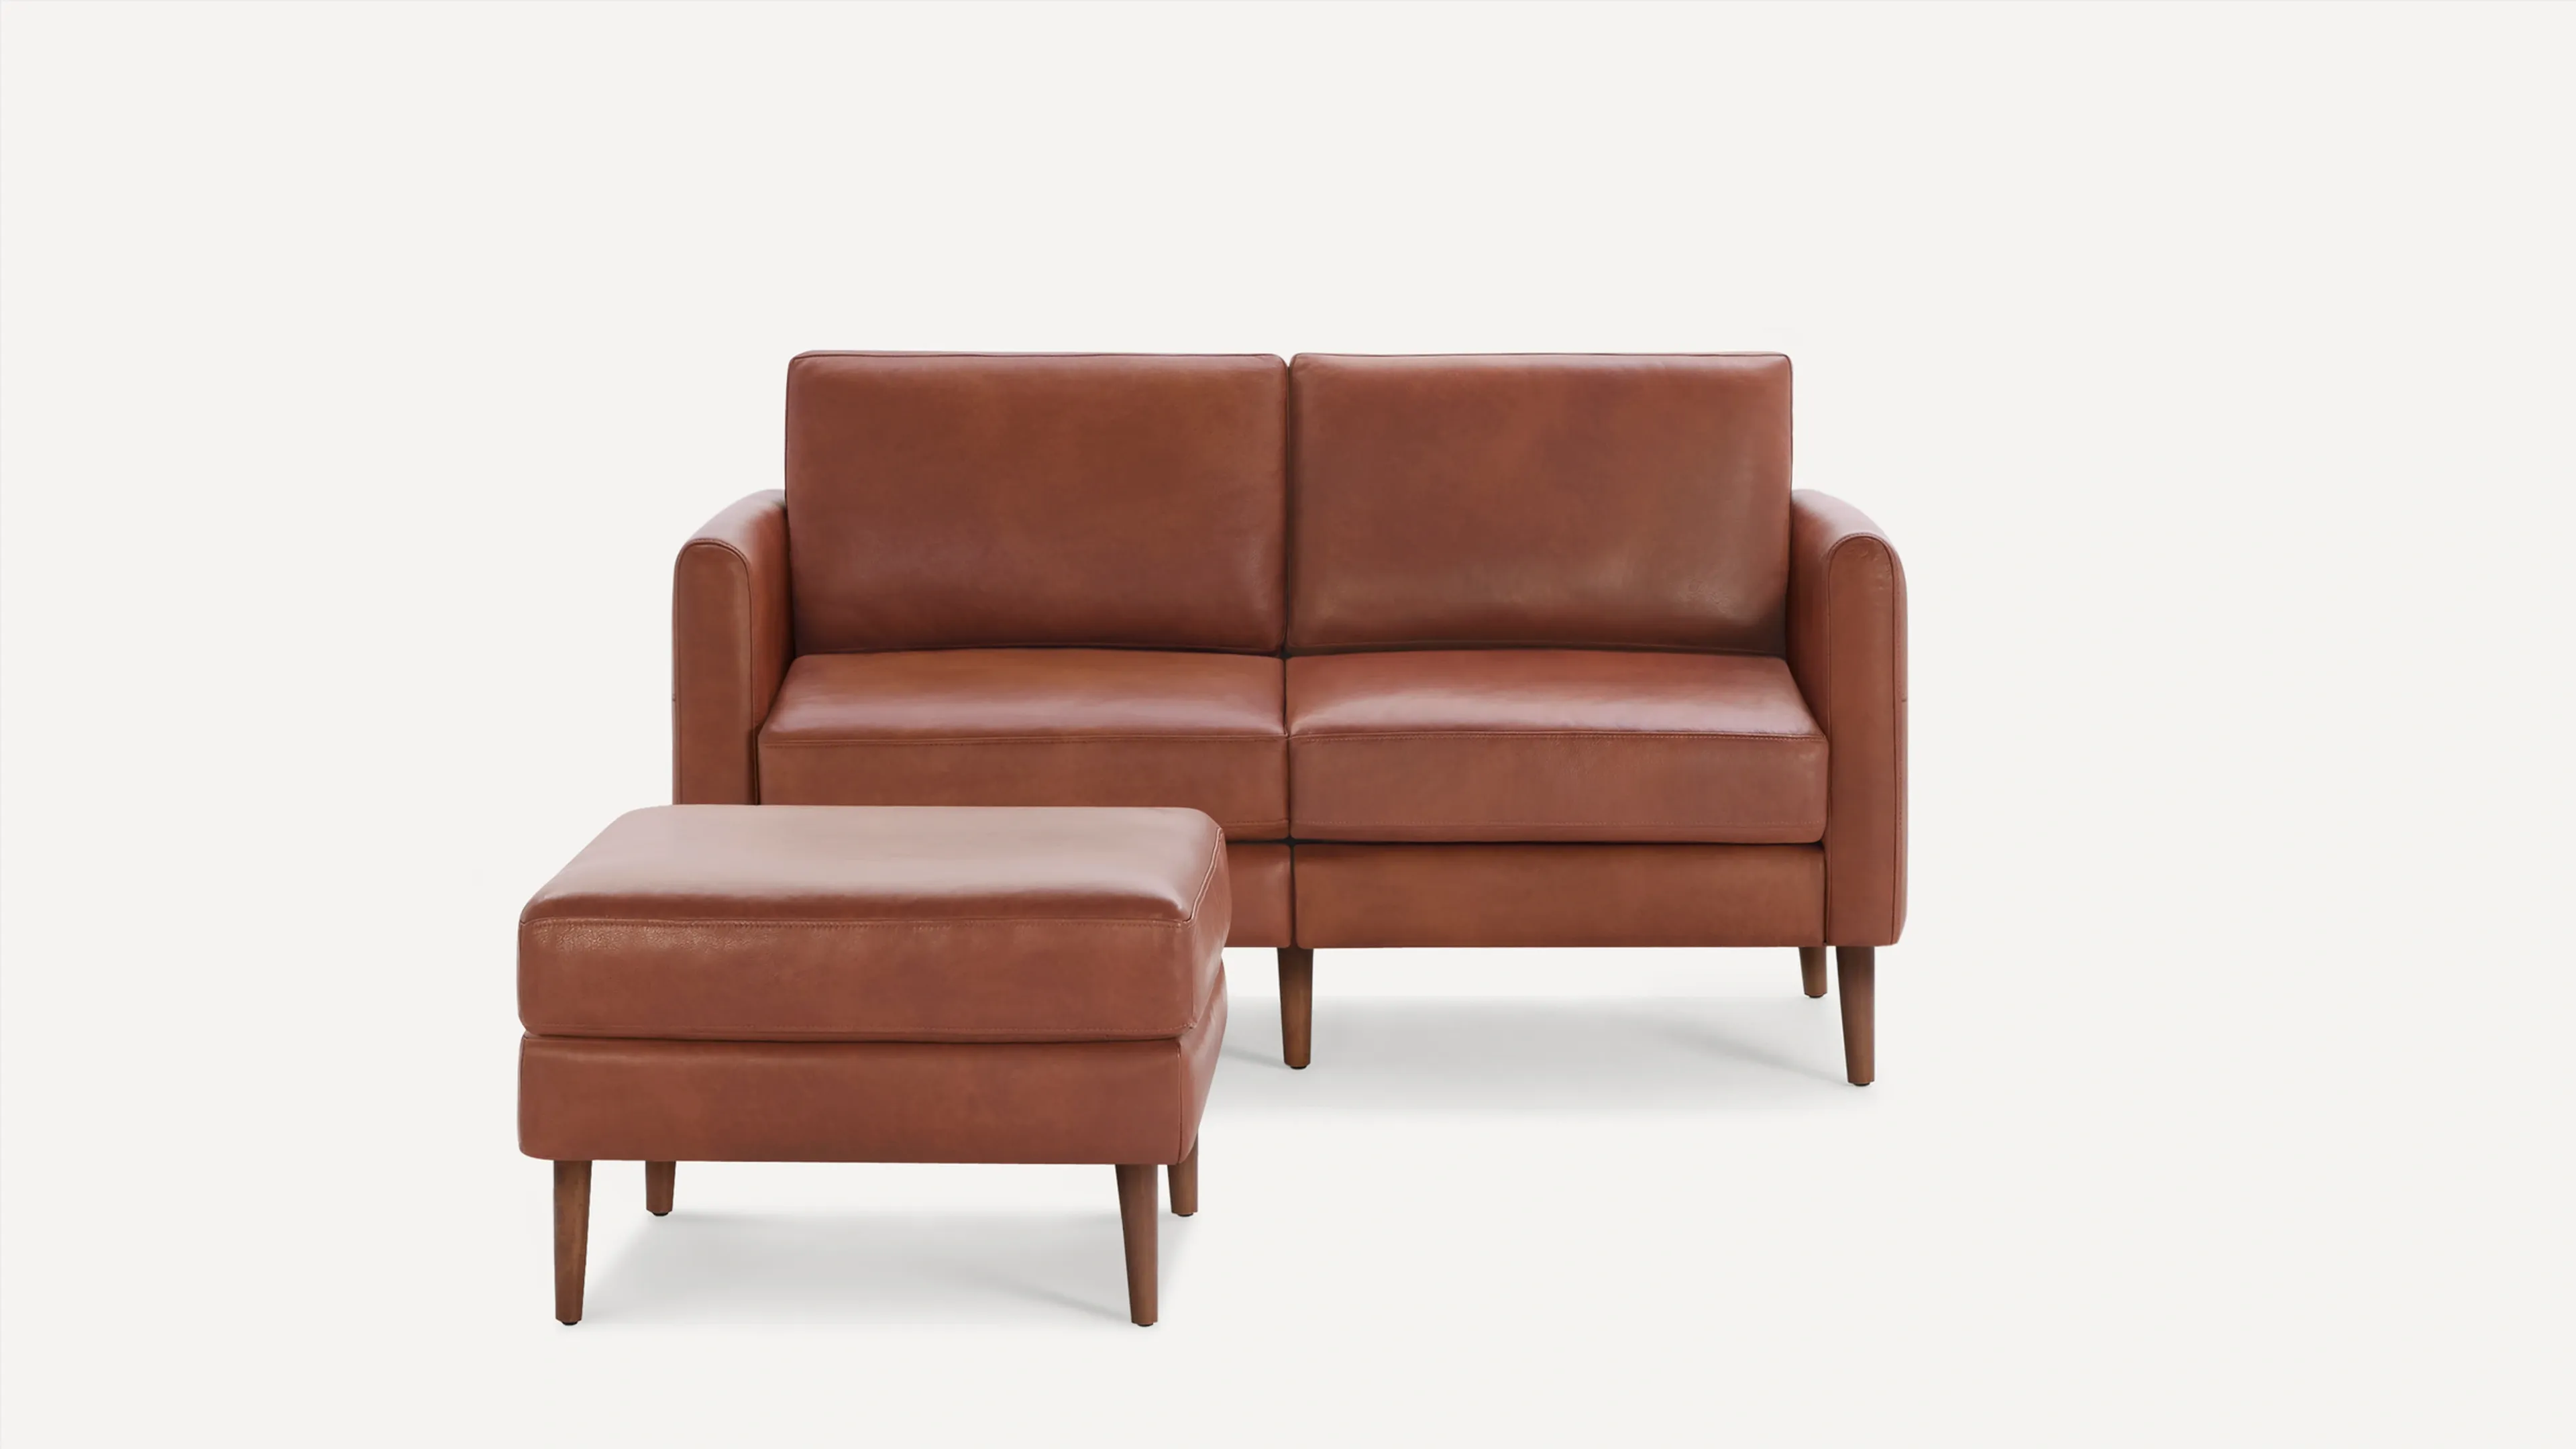 Original Loveseat with Ottoman in Chestnut Leather